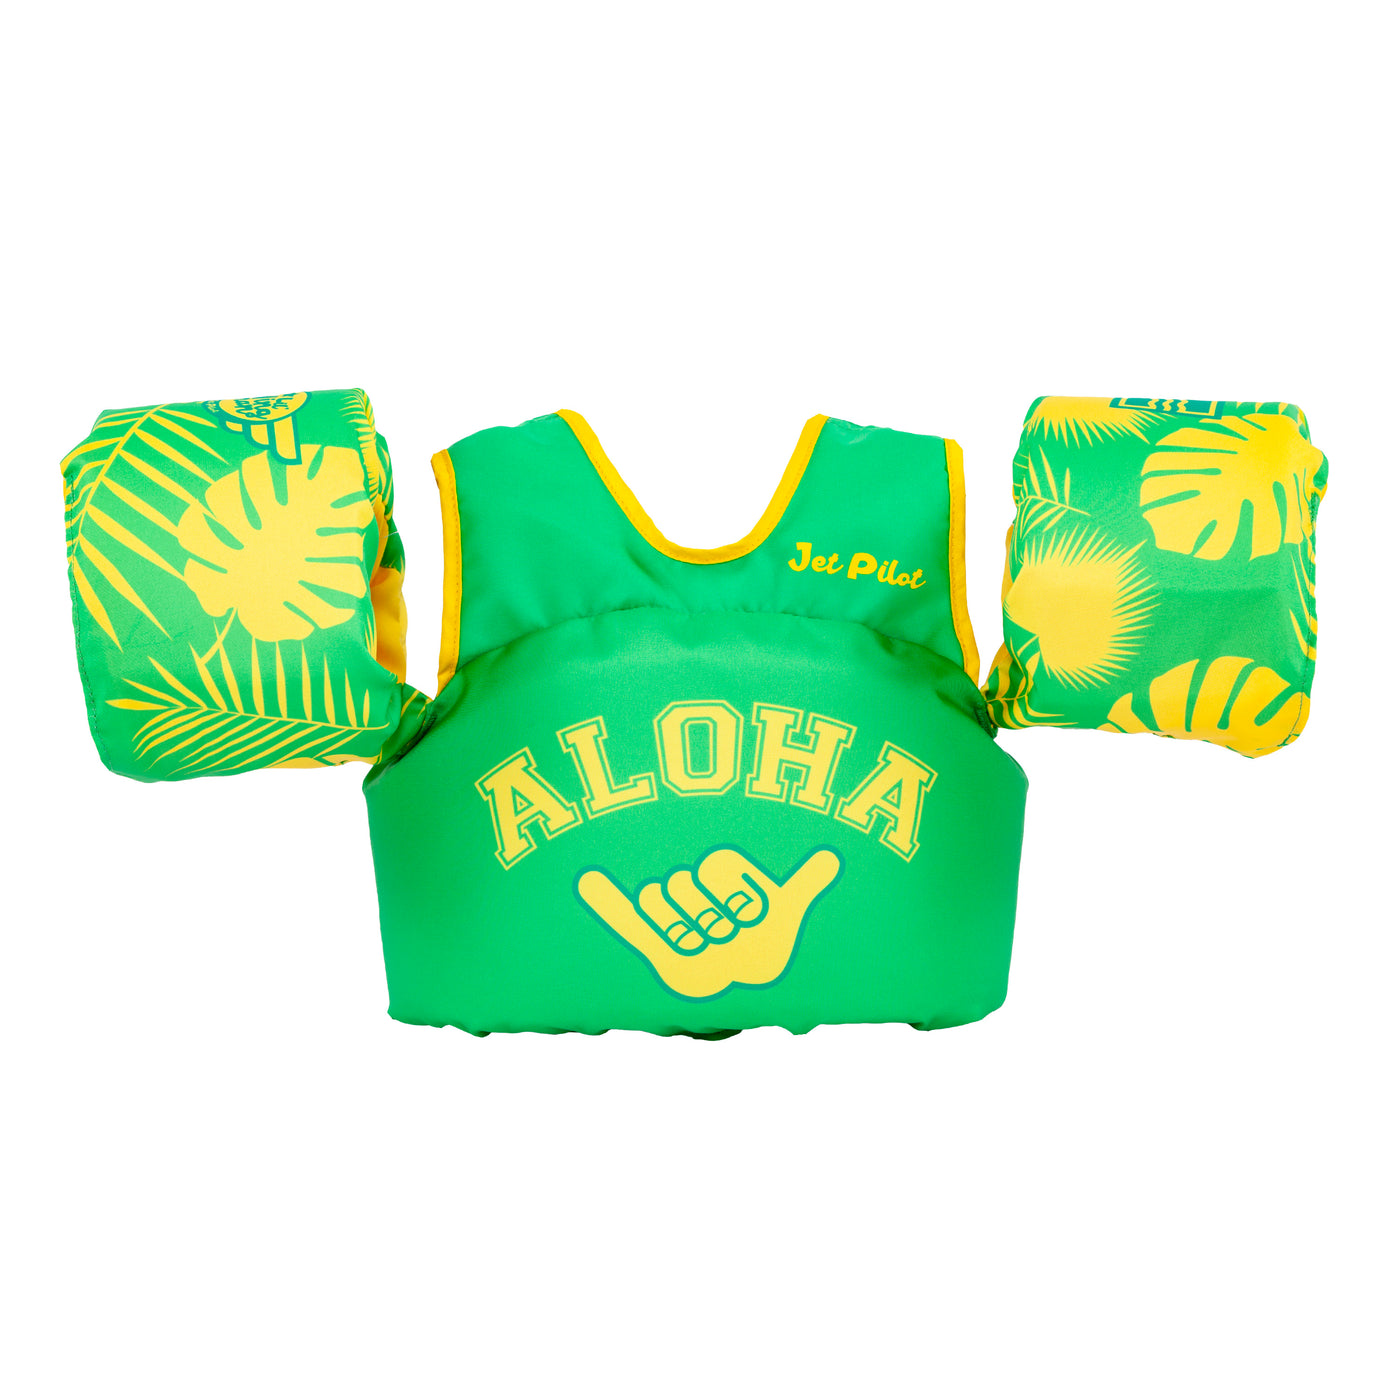 Front view of the Jetpilot Lil Wing Man Infant swim vest Aloha colorway